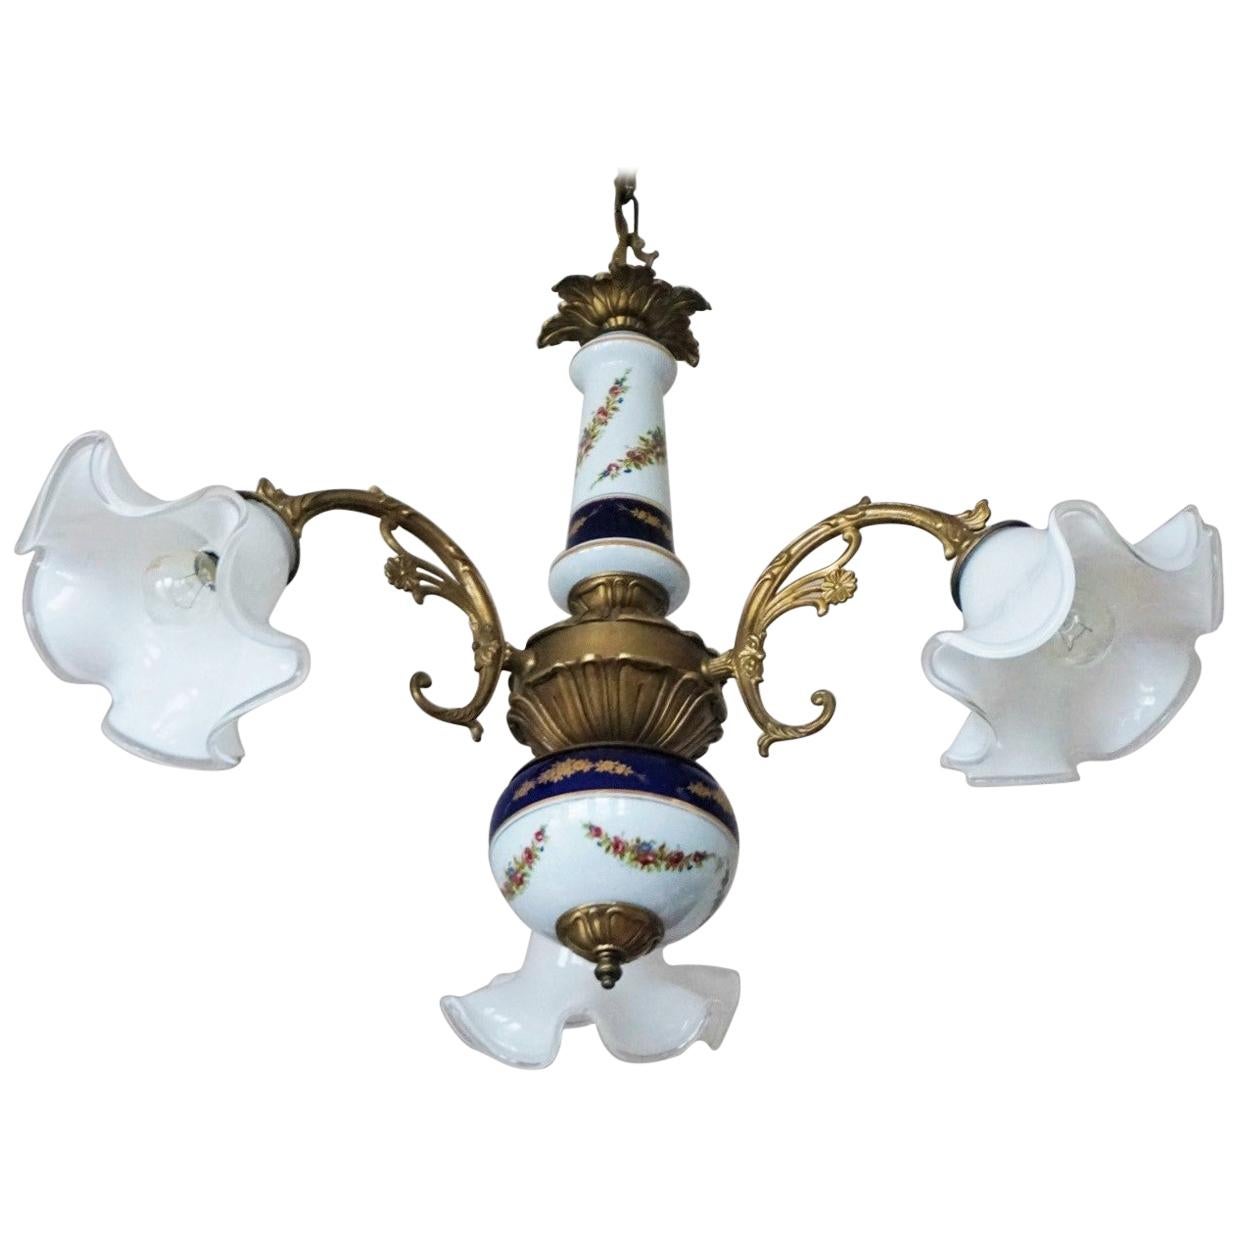 Midcentury French Limoges Porcelain and Murano Glass Three-Light Chandelier